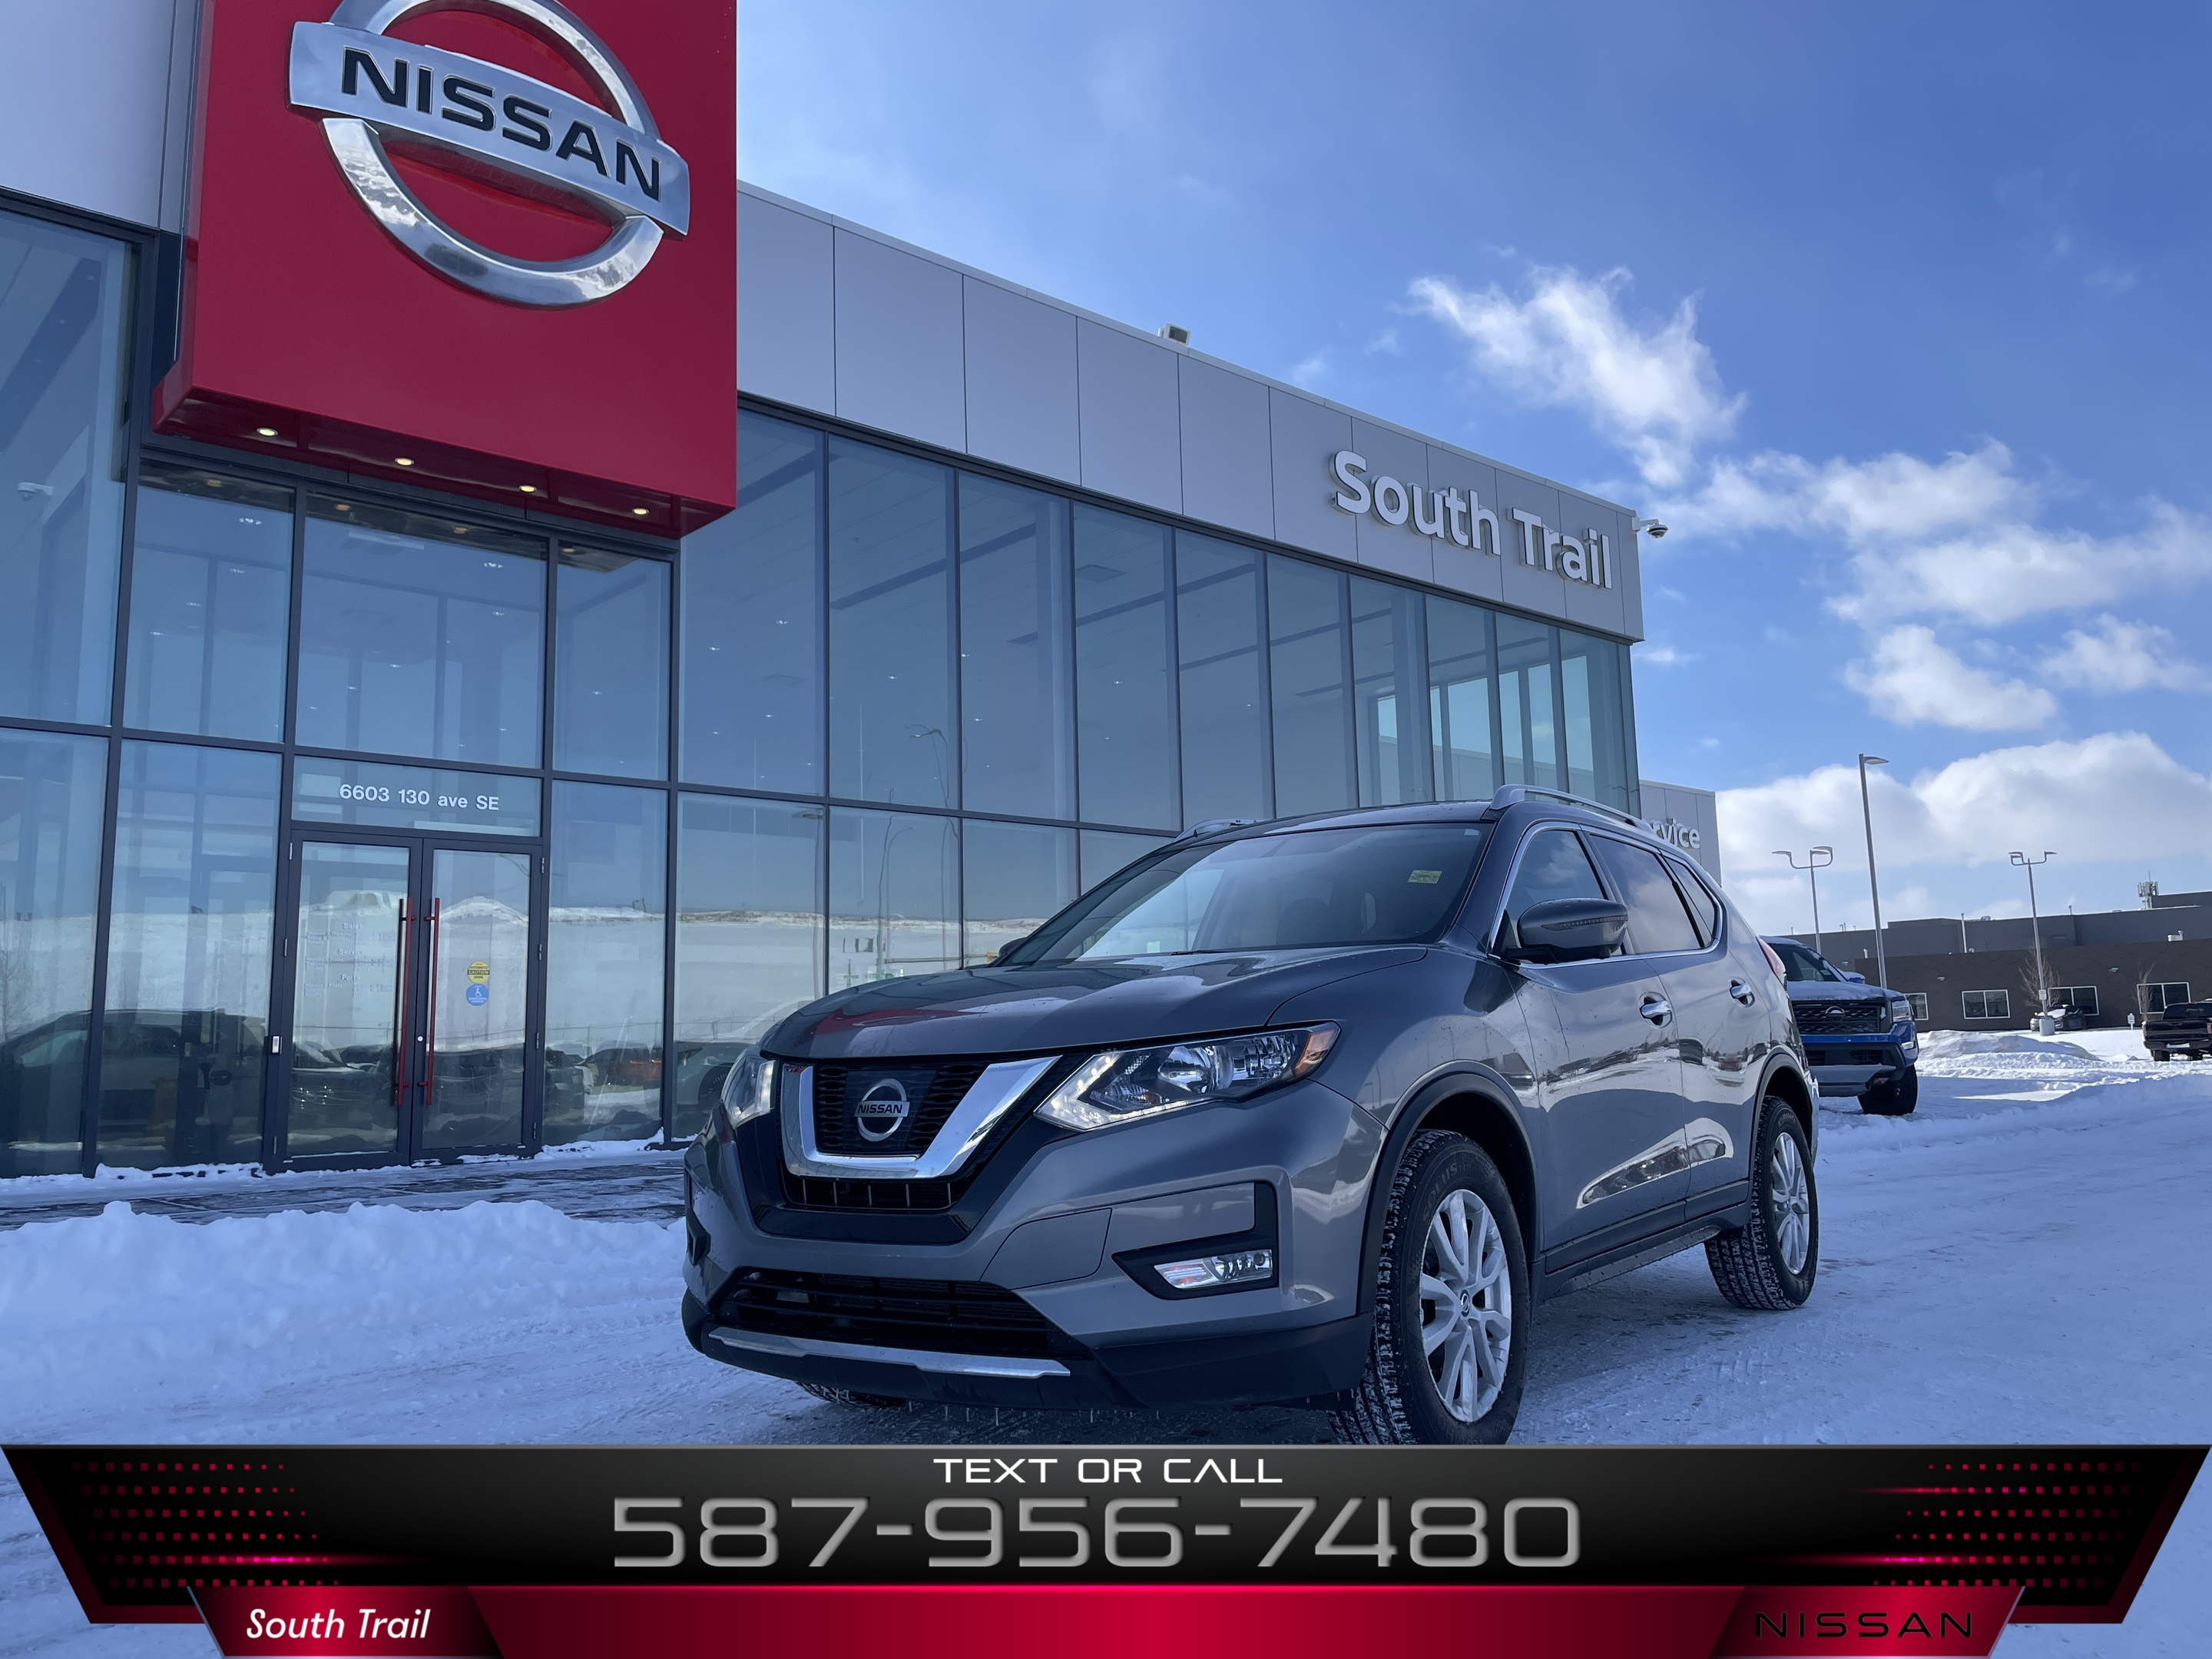 2017 Nissan Rogue SV AWD w/ Tech Package *360 CAM + POWER LIFTGATE*